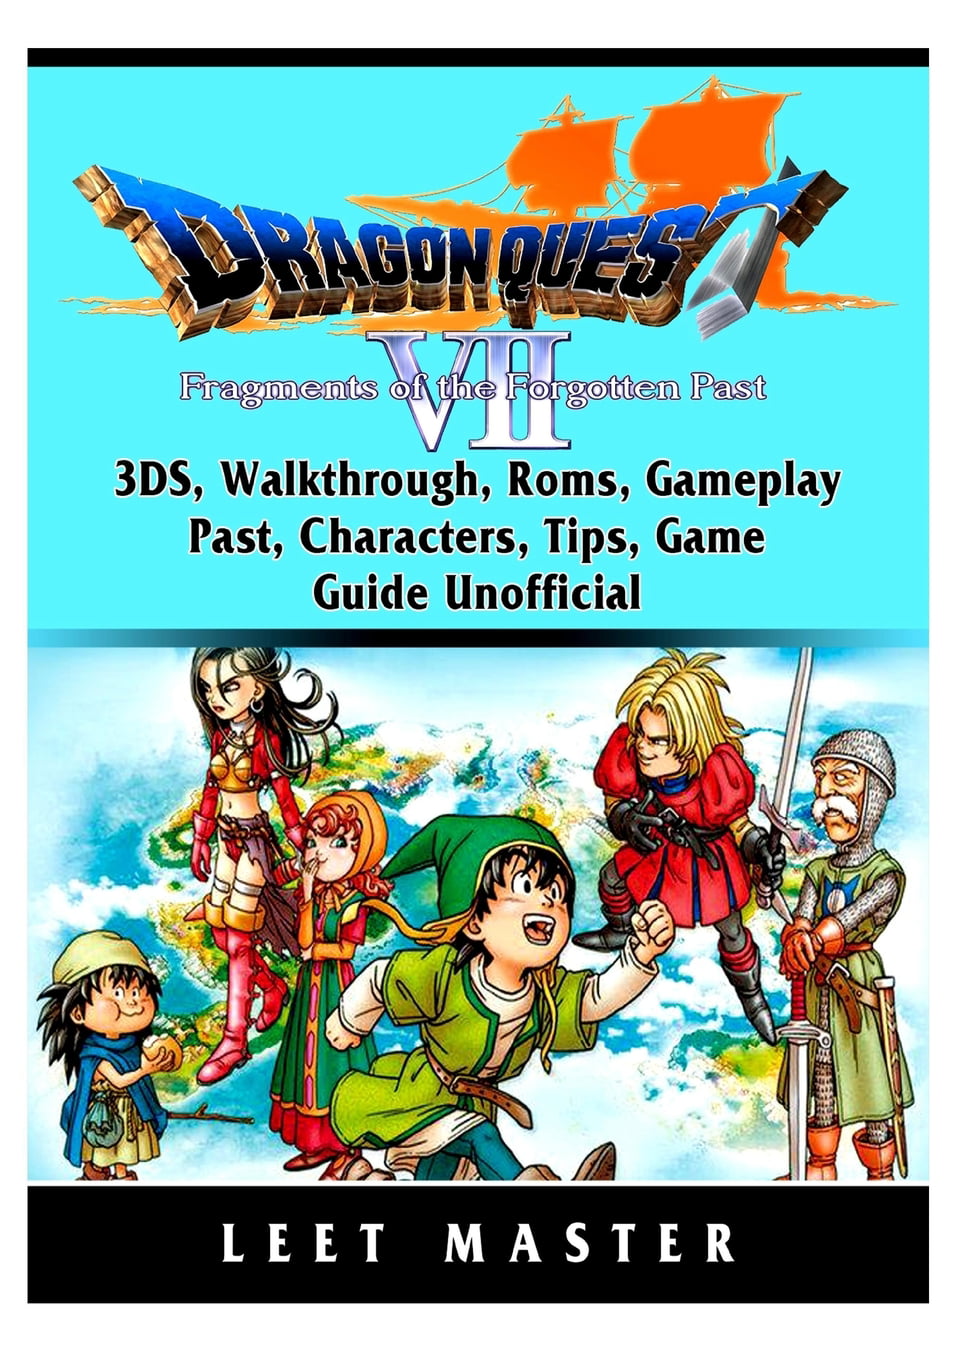 Quest VII Fragments of a Forgotten Past, 3ds, Walkthrough, Roms, Past, Characters, Tips, Game Guide Unofficial (Paperback) Walmart.com